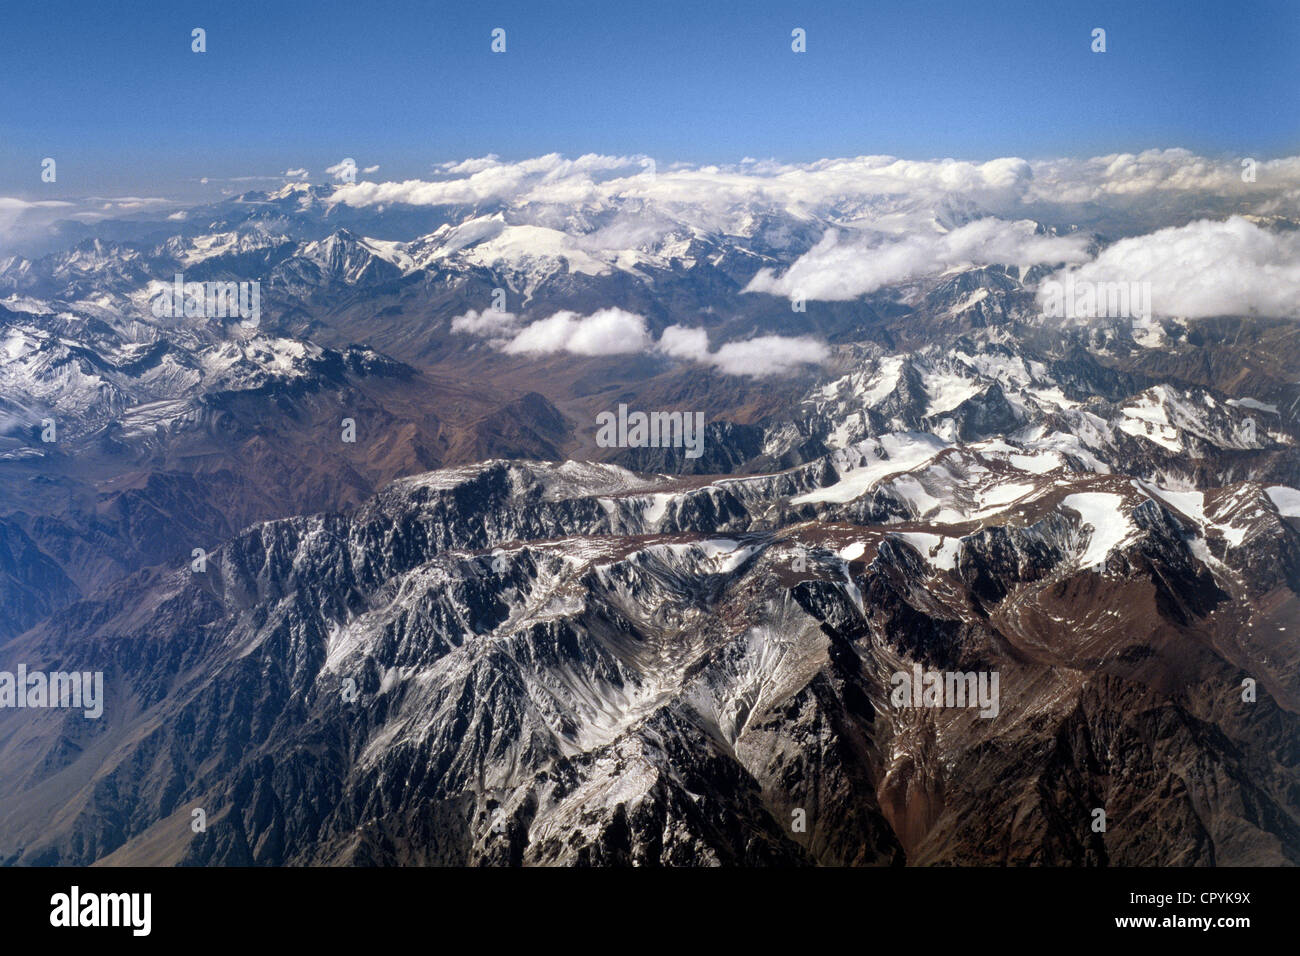 Chili, Valparaiso Region, crossing over Andes mountain range between Chile and Argentina (aerial view) Stock Photo